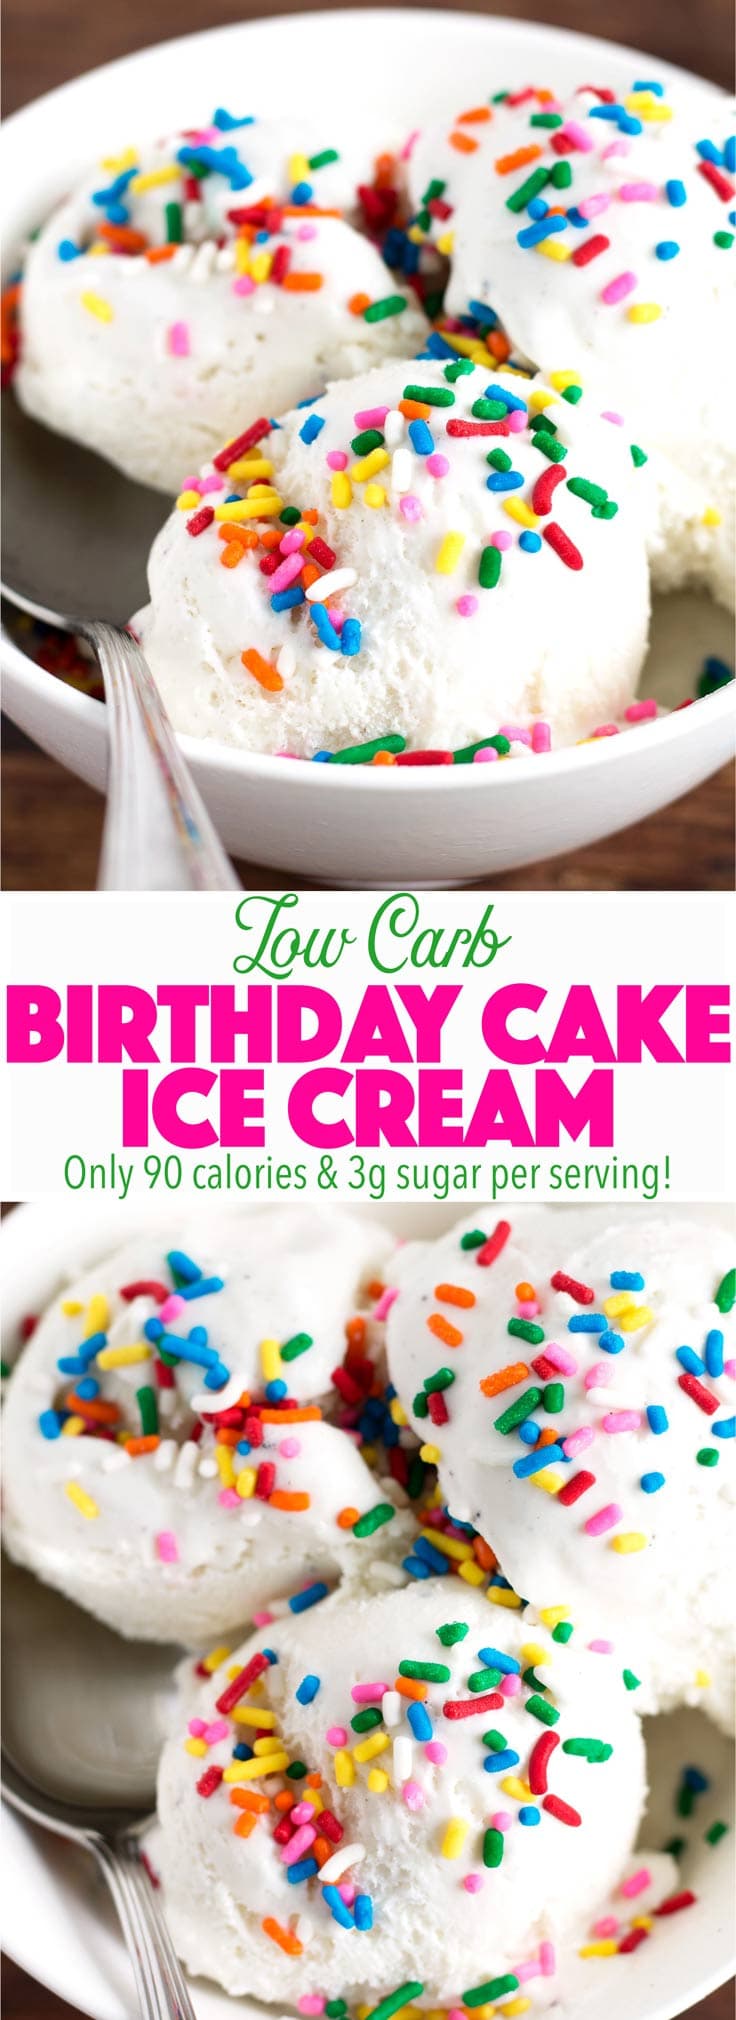 Easy to make and SO GOOD! This healthier birthday cake ice cream has no added sugar and is instead made with monk fruit! Low carb and keto friendly! 